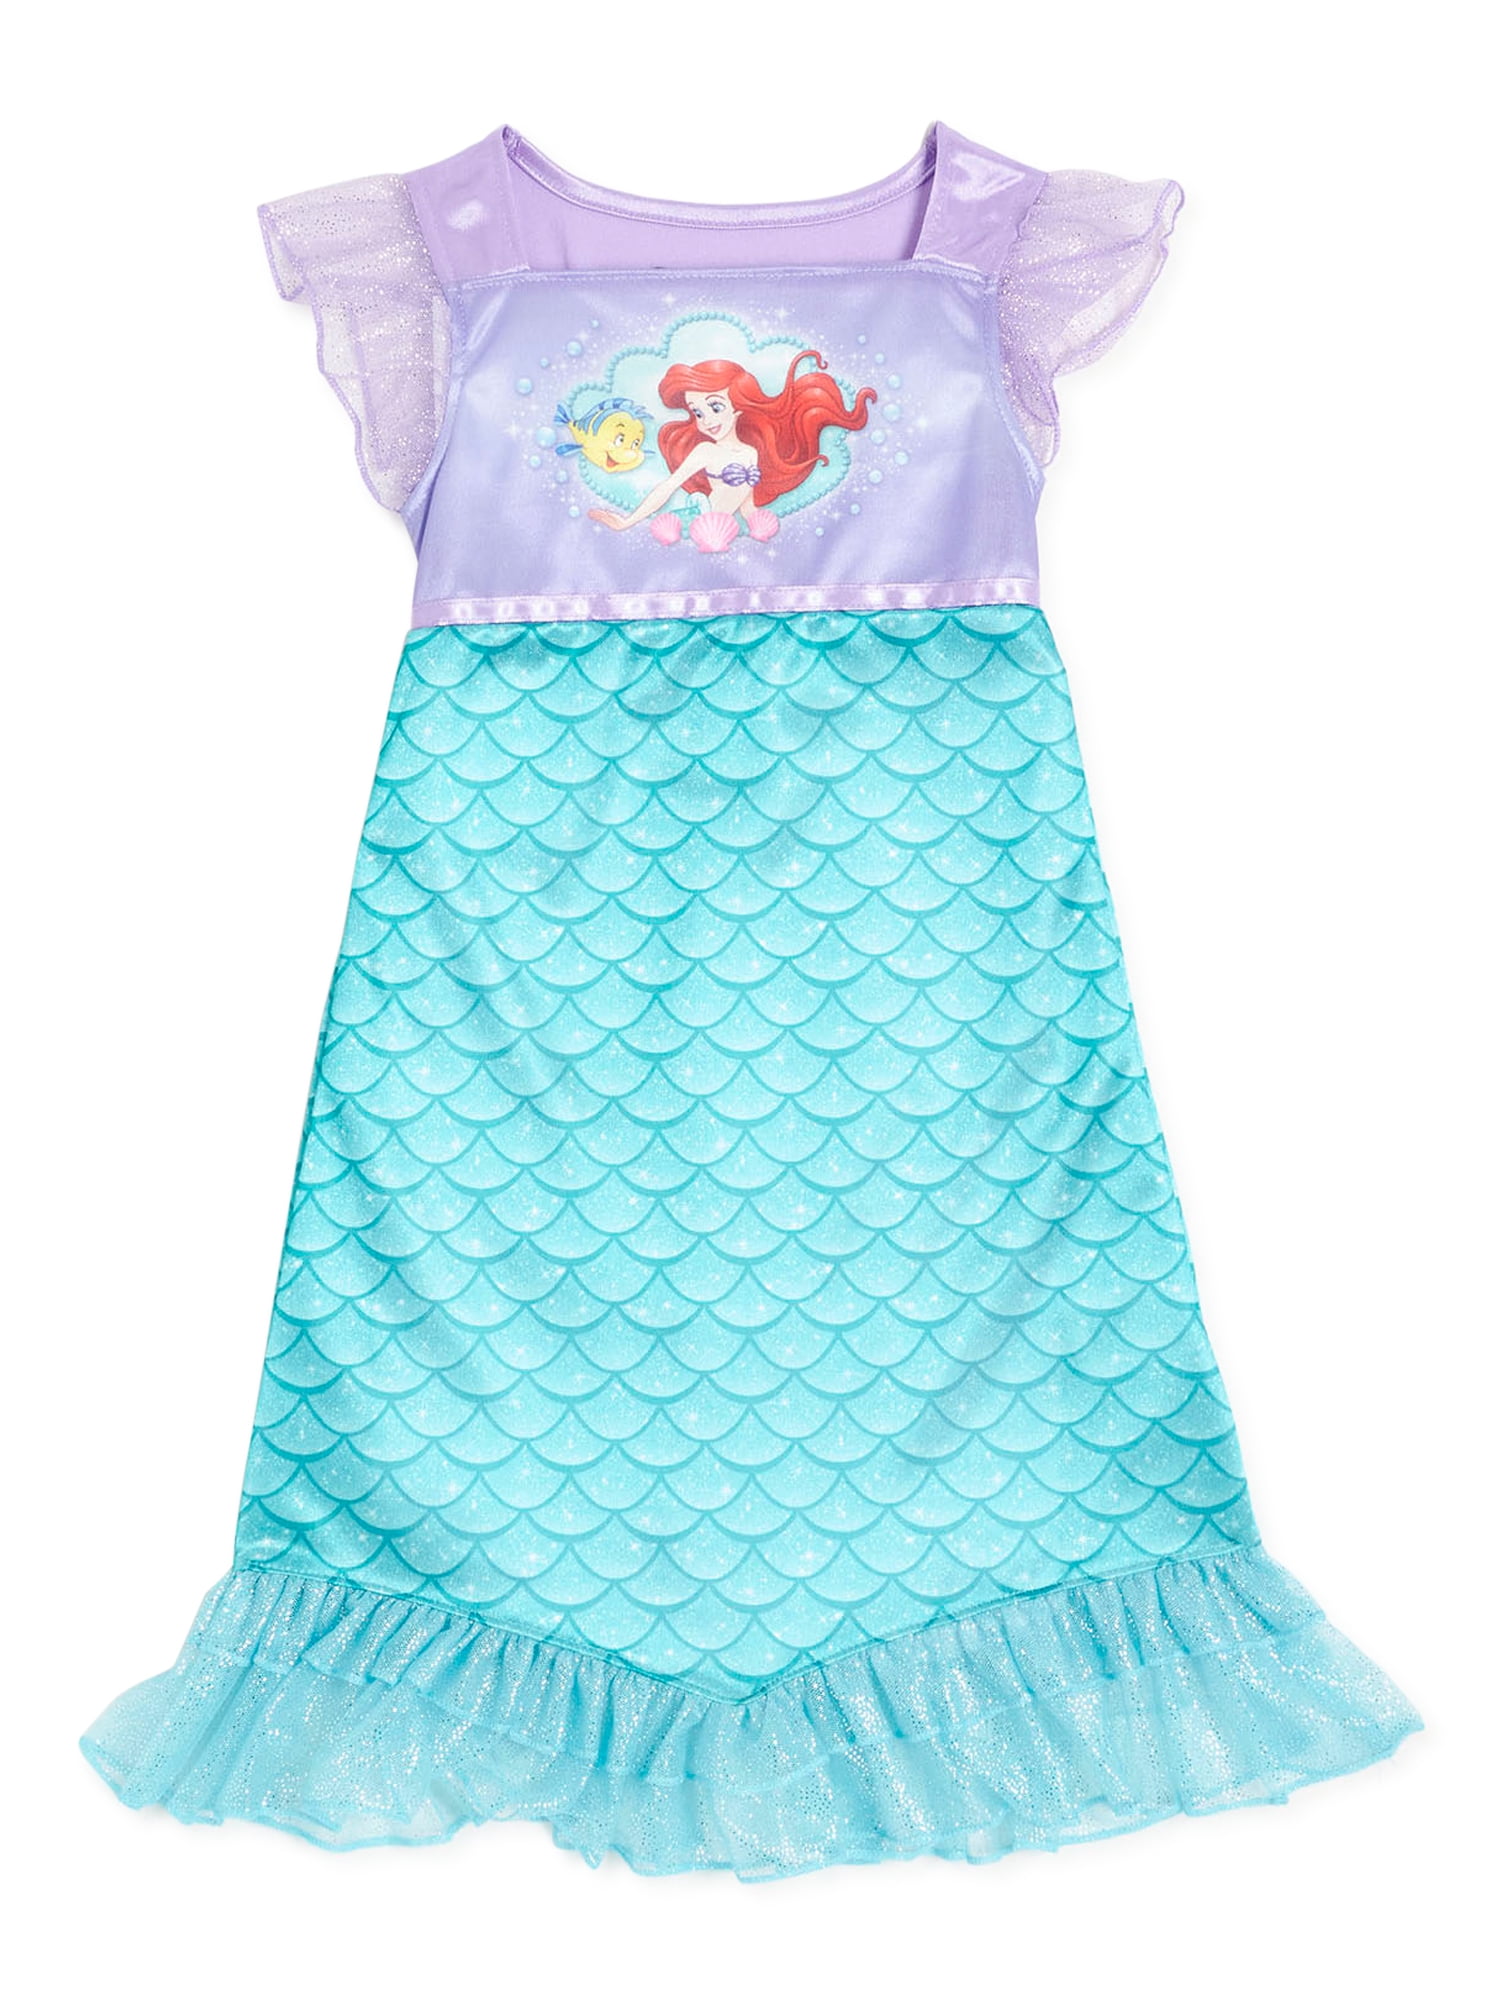 Details about   Princess of the sea Size Toddler 2-4 